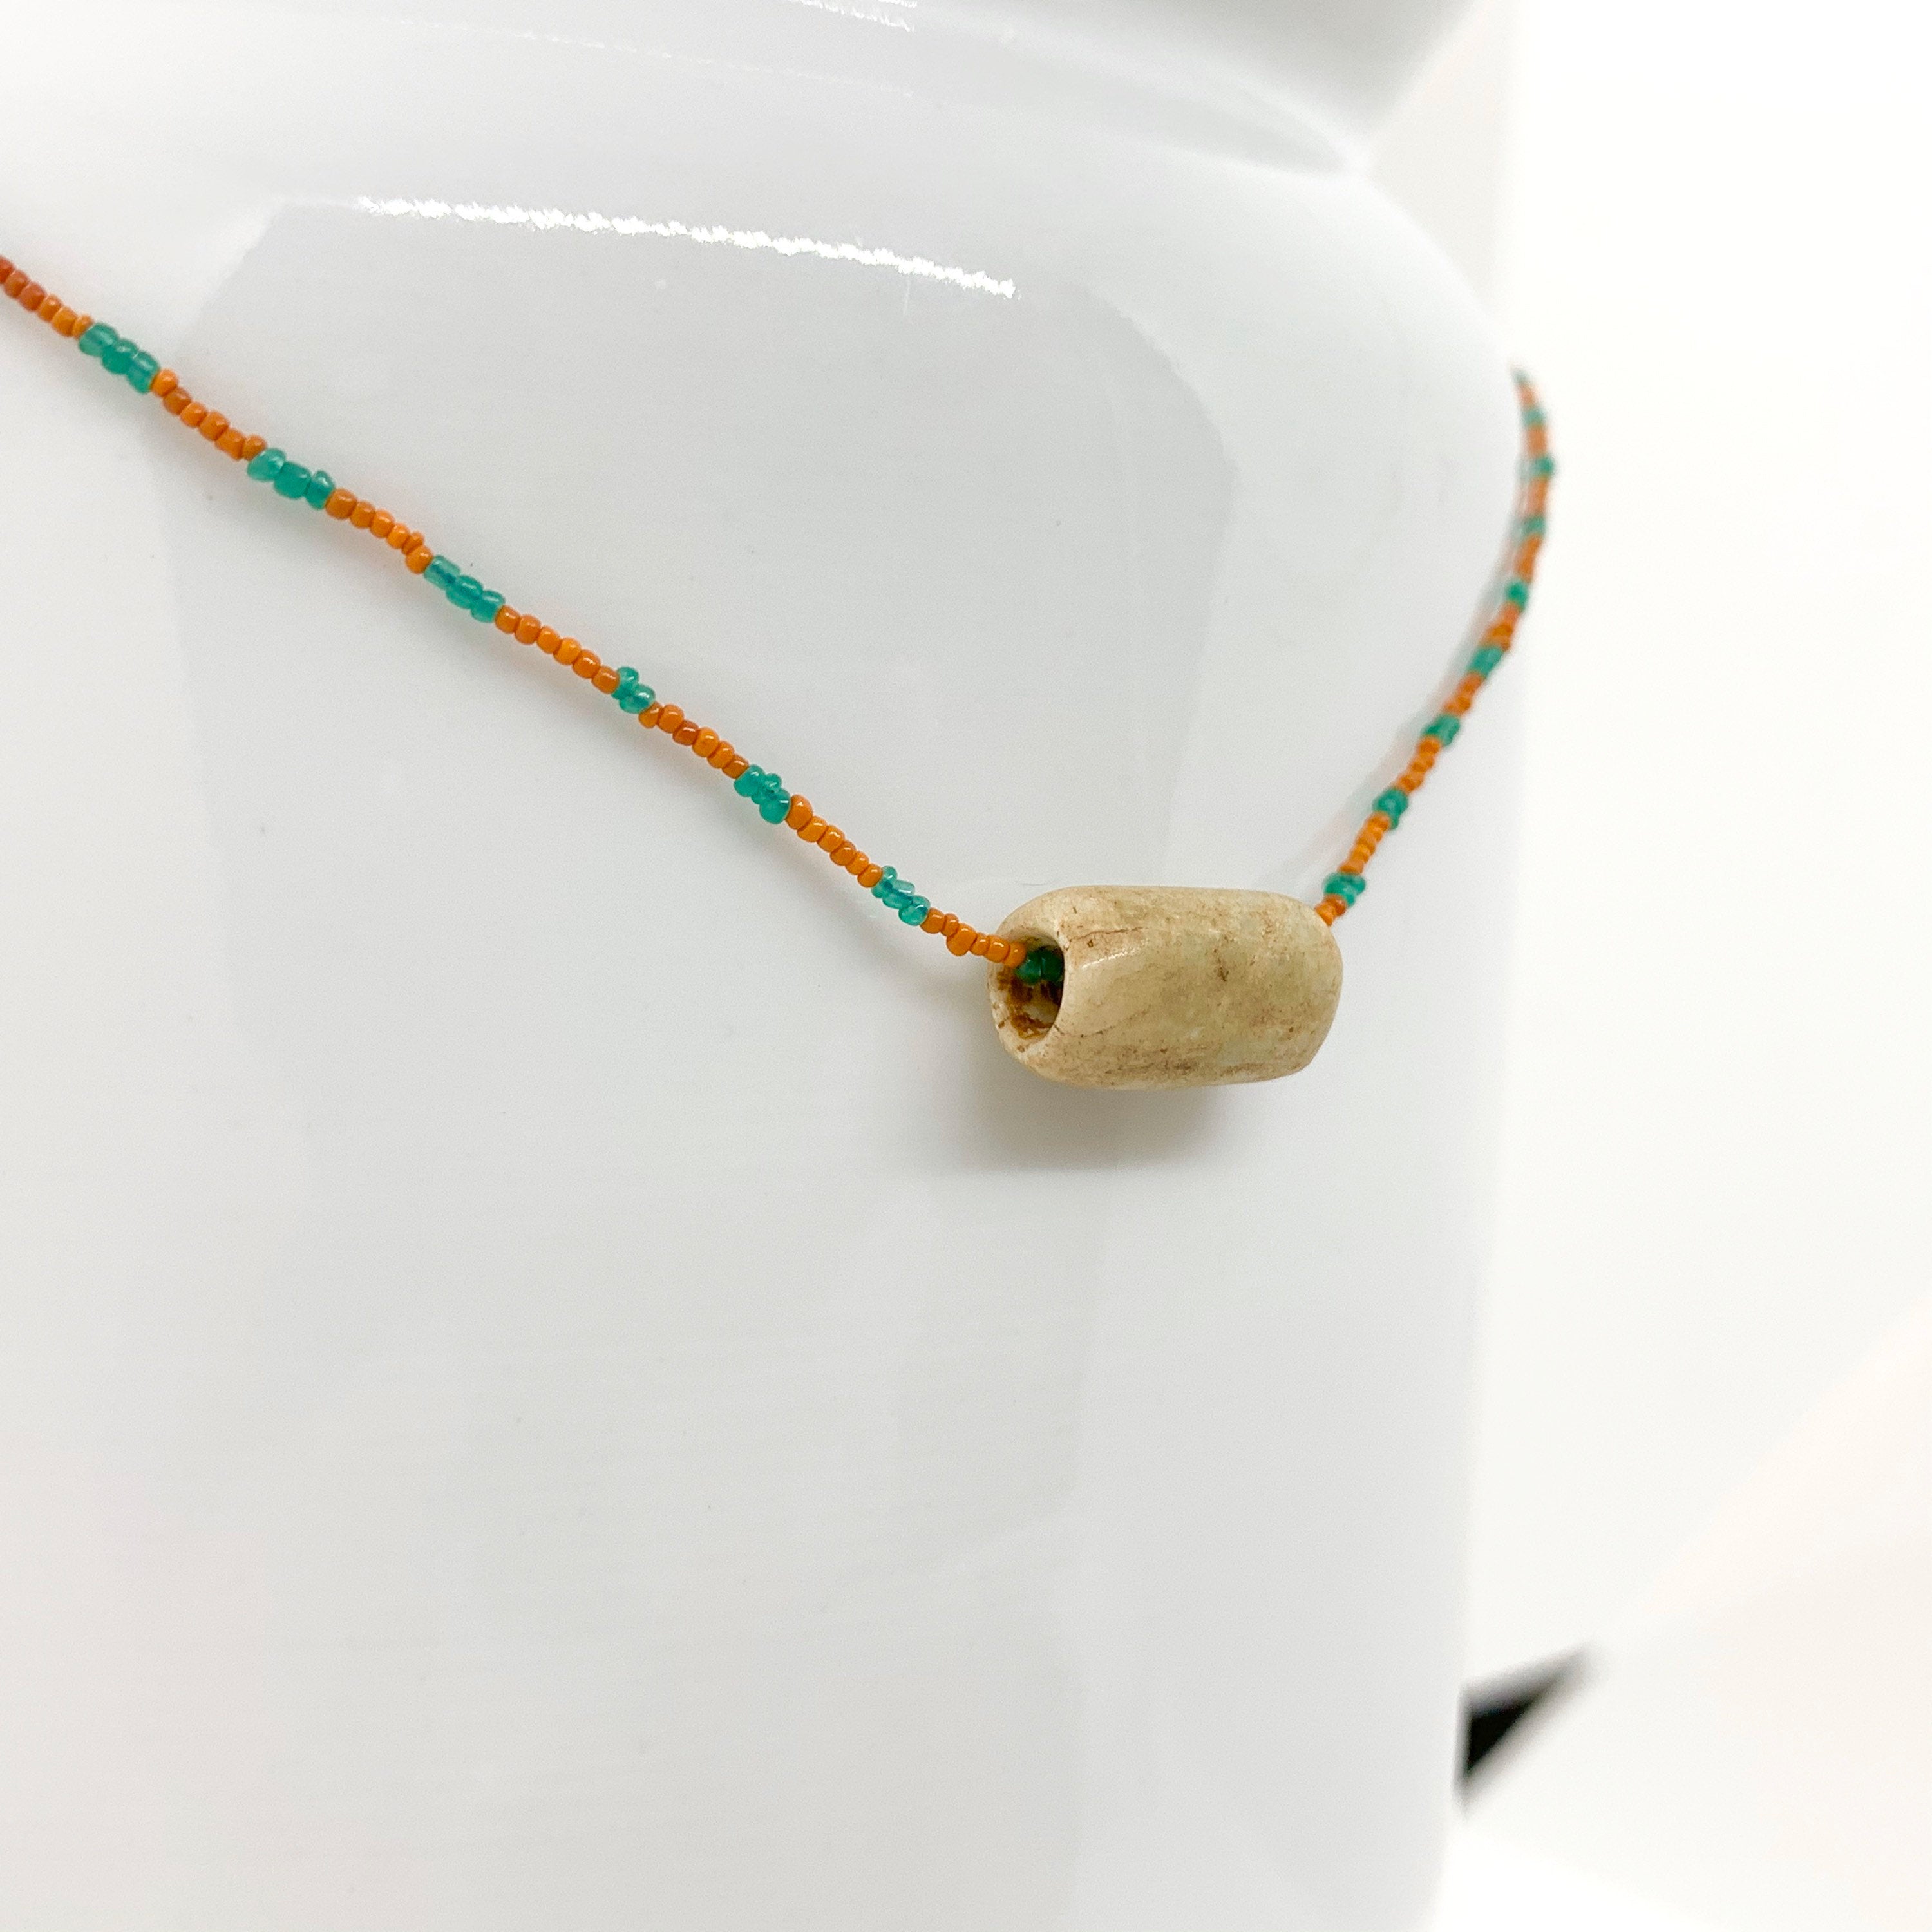 String Beaded Necklace w/ Pre-Columbian White Jade & Antique Italian Beads